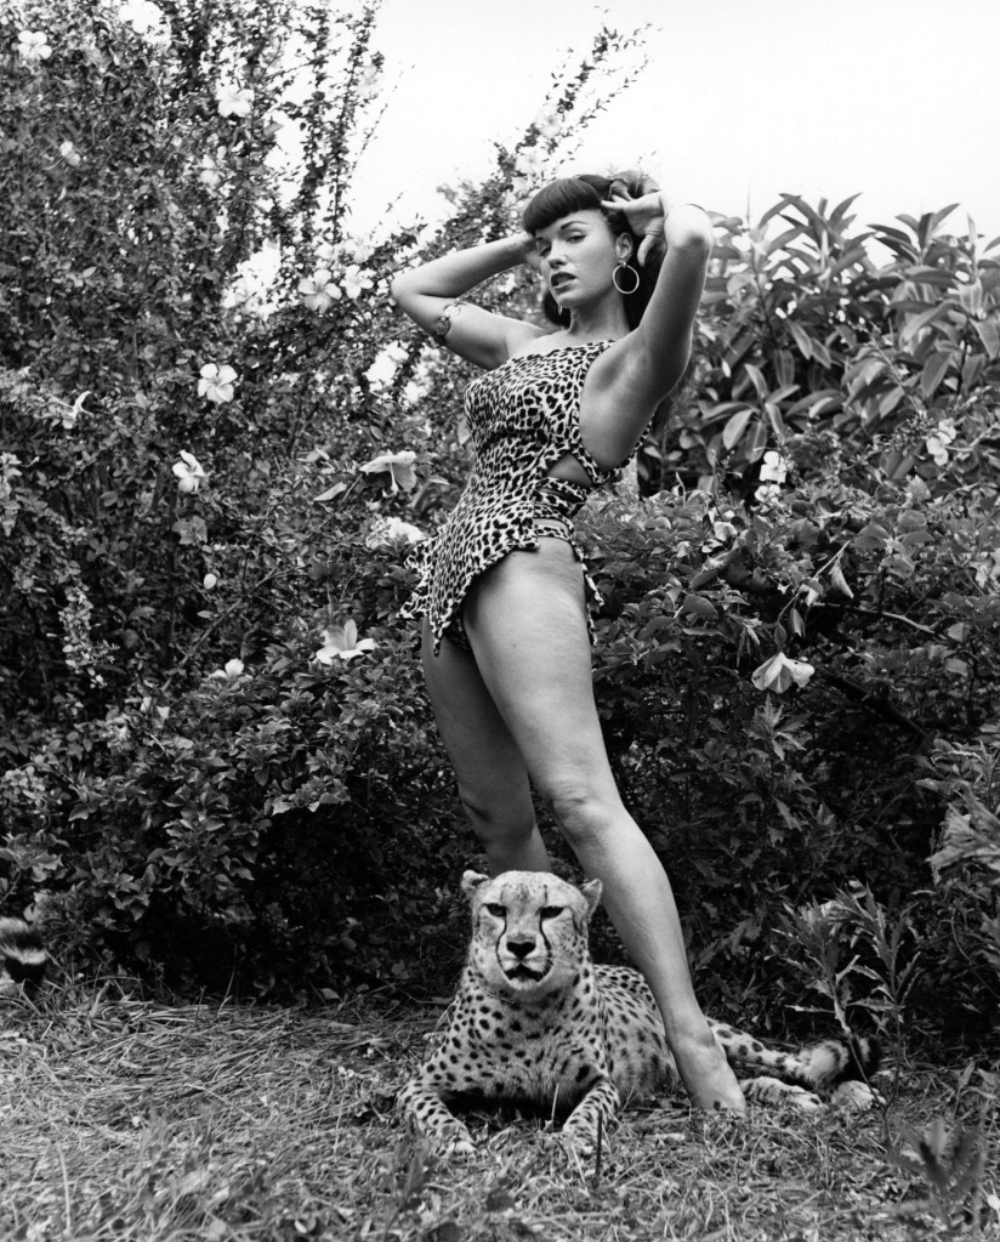 Bettie Page And The Iconic Cheetah Pinups Heres The Story Behind The